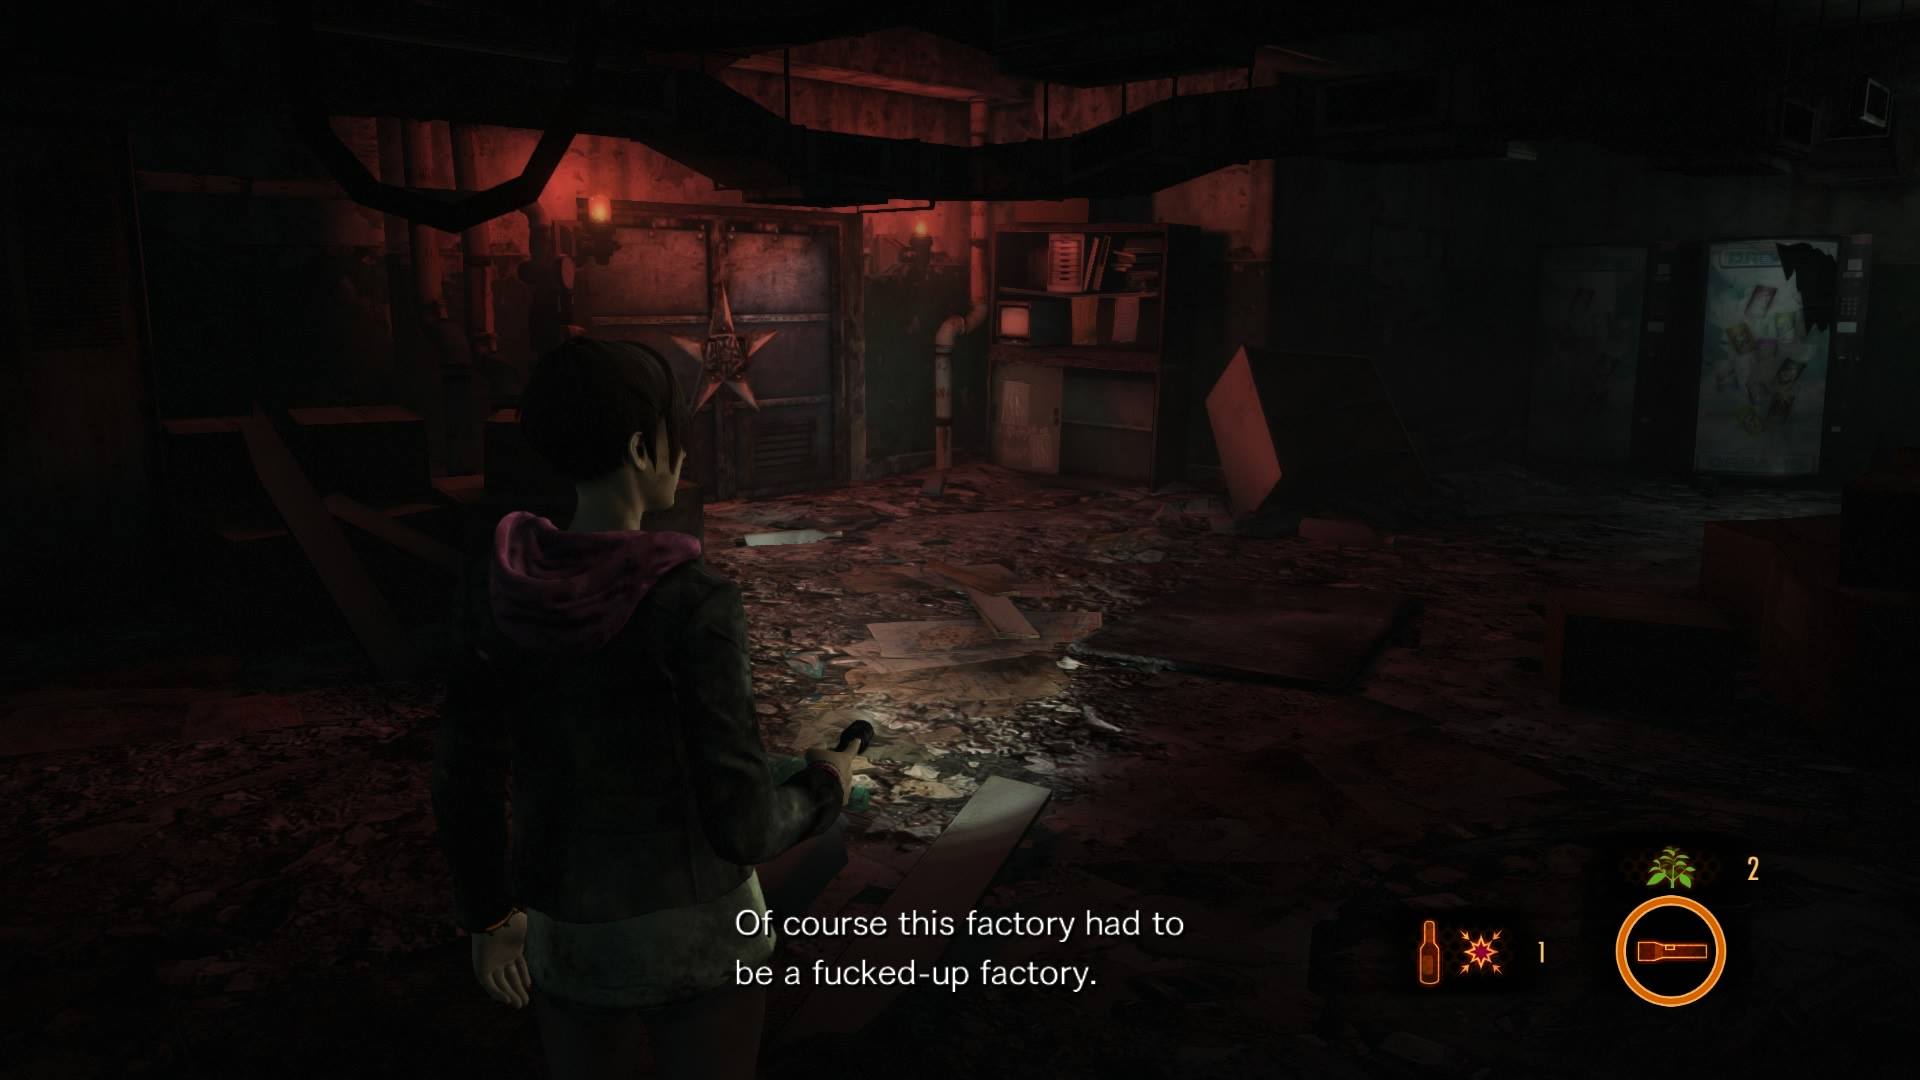 Get To Know Resident Evil Revelations 2's Claire And Moira - Game